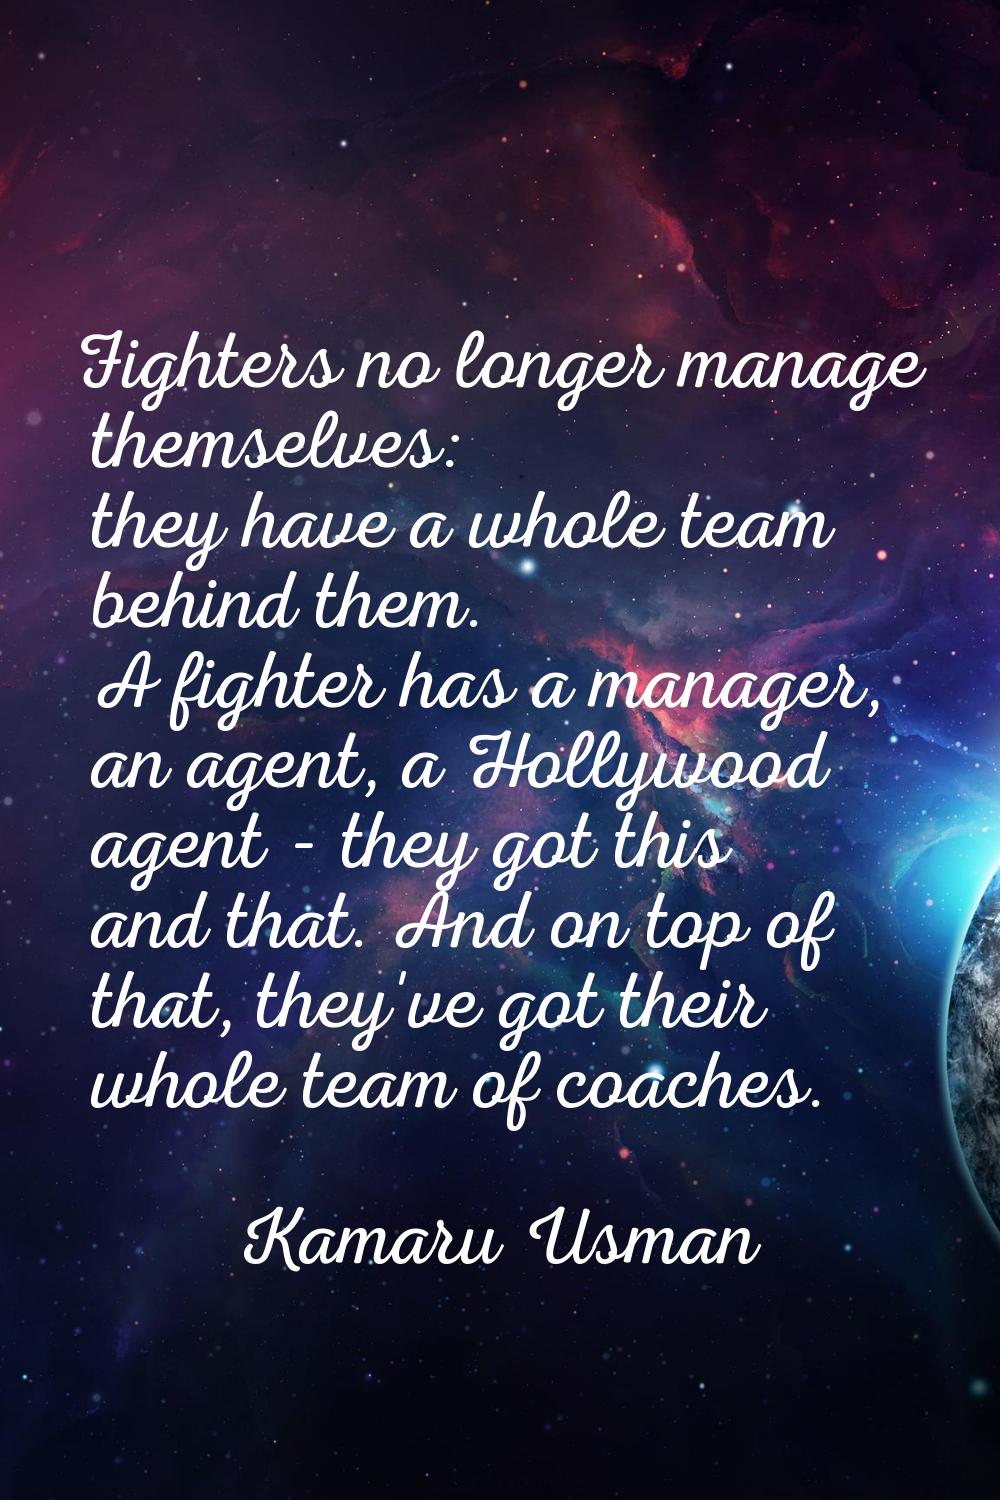 Fighters no longer manage themselves: they have a whole team behind them. A fighter has a manager, 